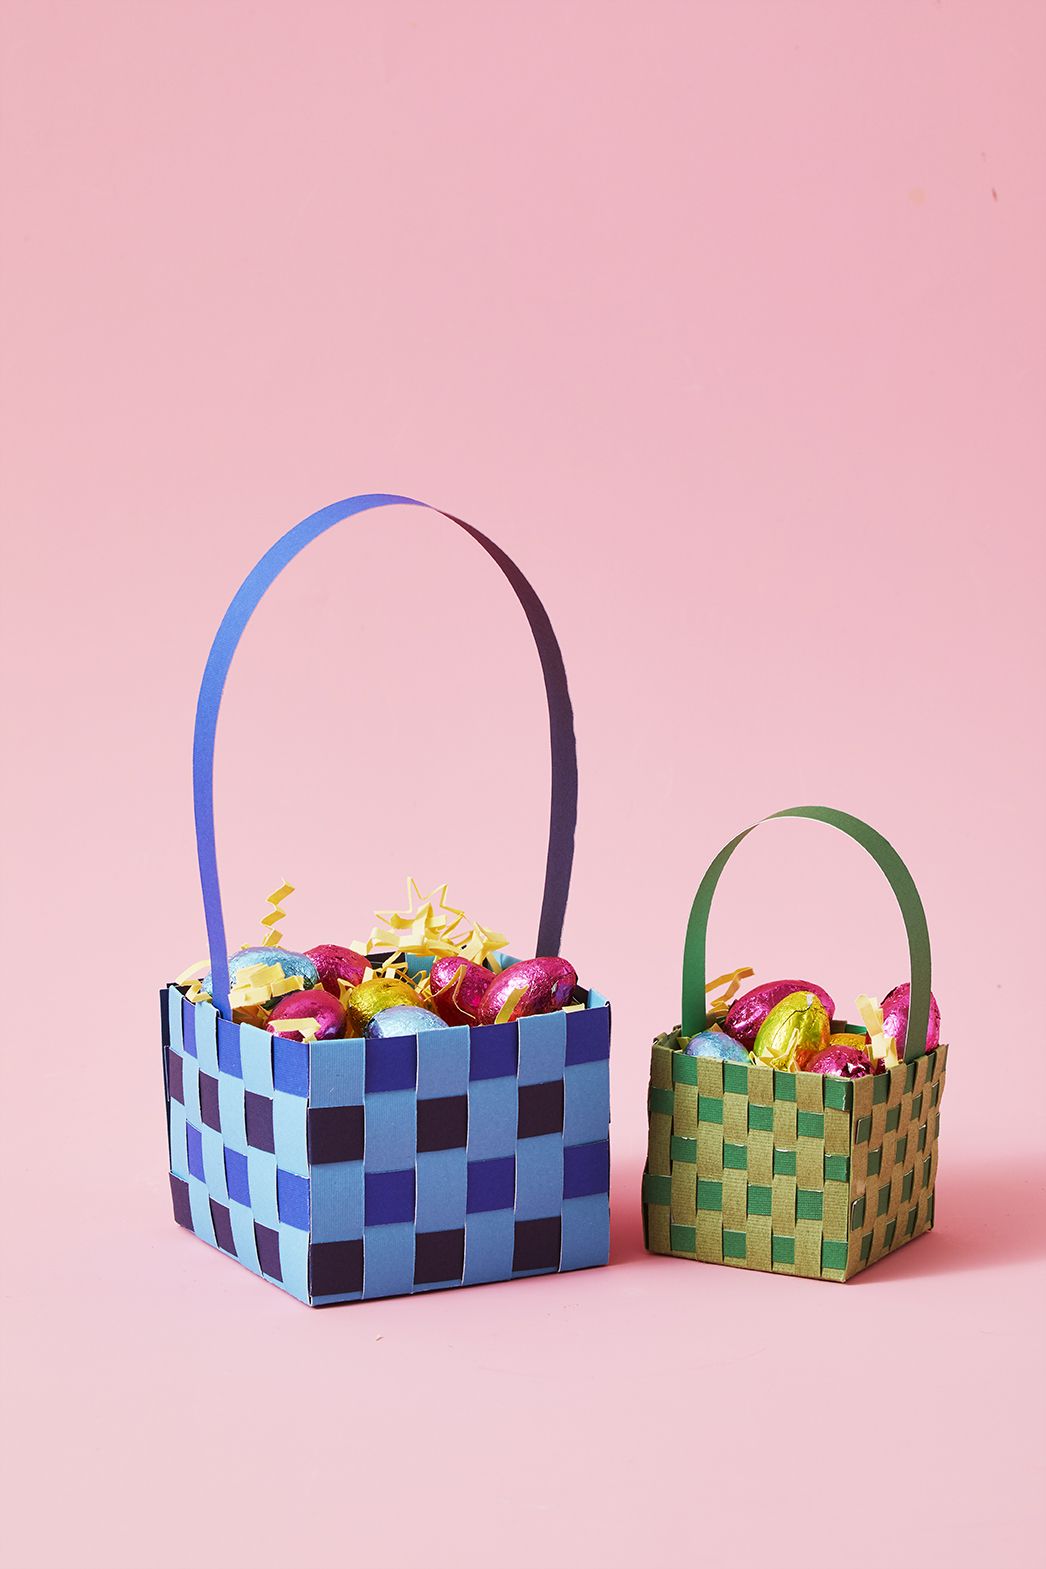 36 Diy Easter Basket Ideas Unique Homemade Easter Baskets,Raised Ranch Exterior Remodel Ideas